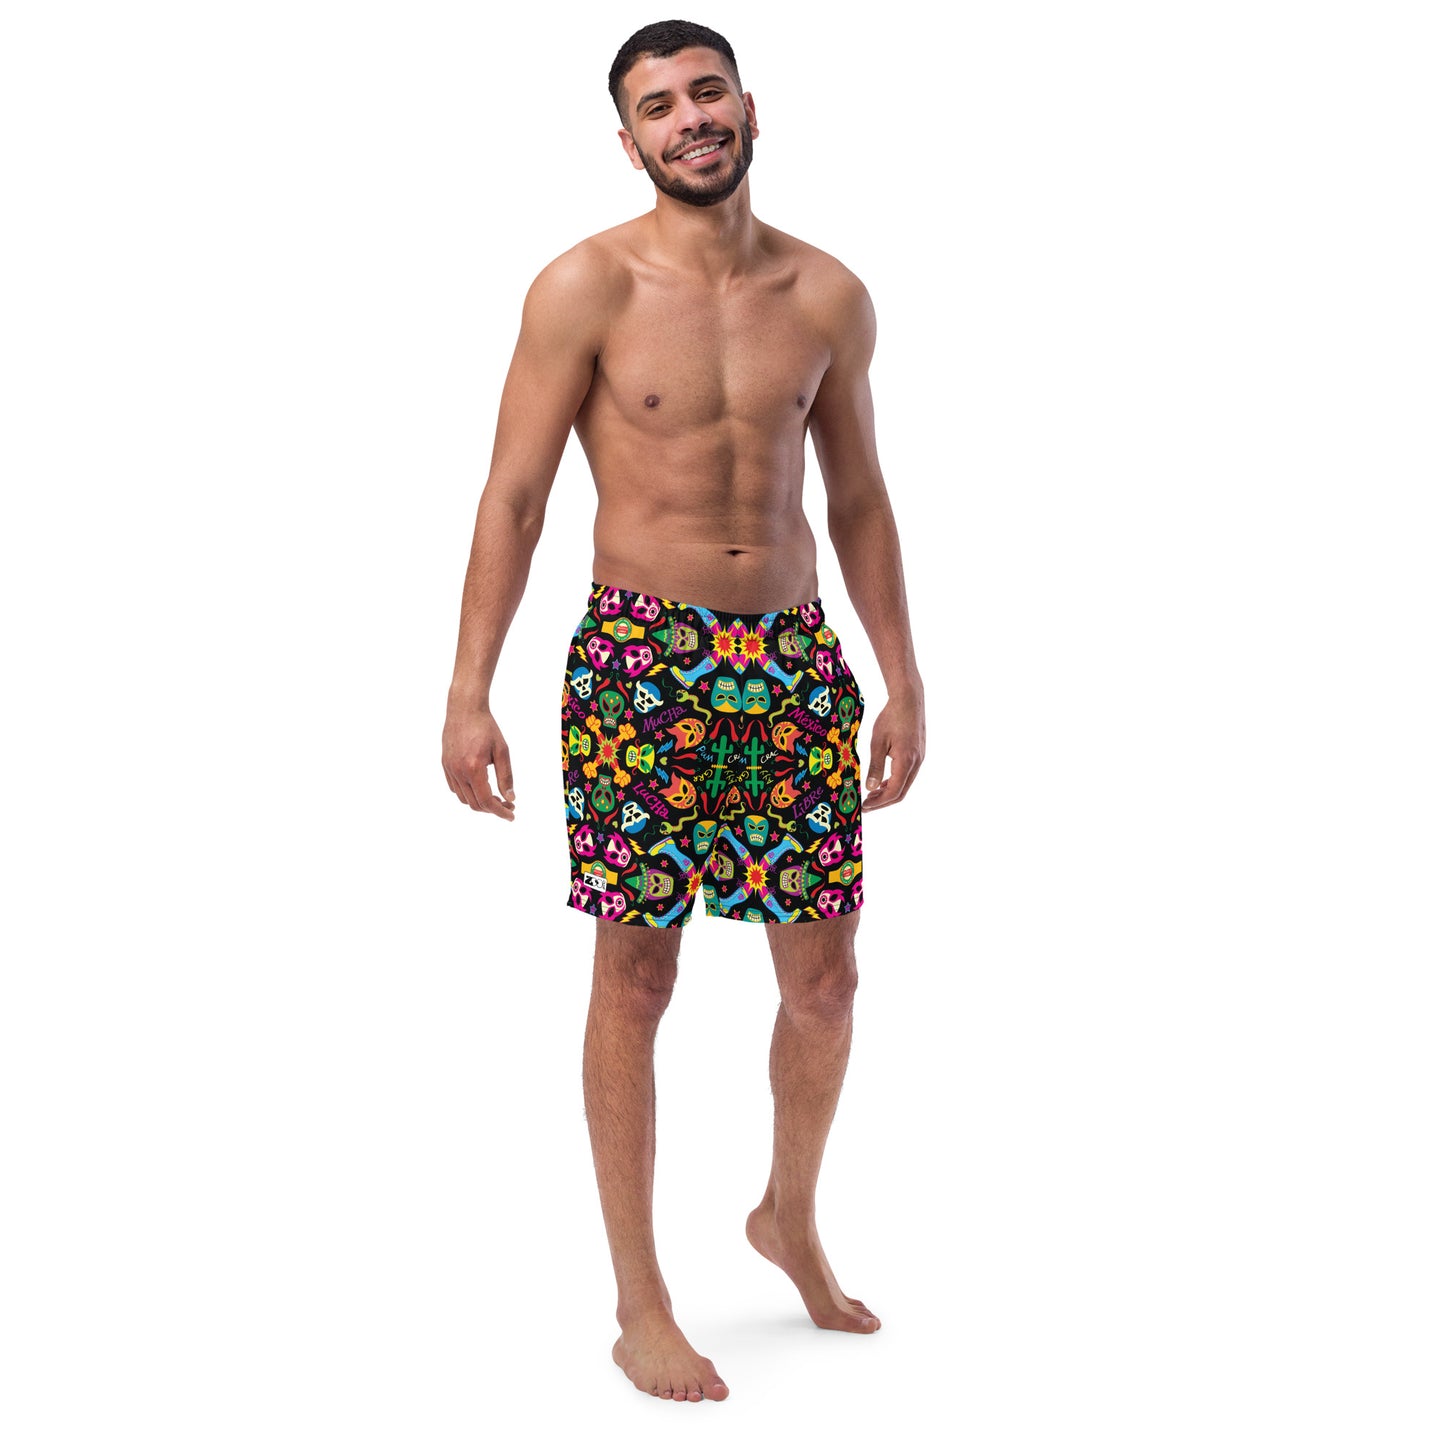 Smiling man wearing Men's Swim Trunks All-over printed with Mexican wrestling colorful party